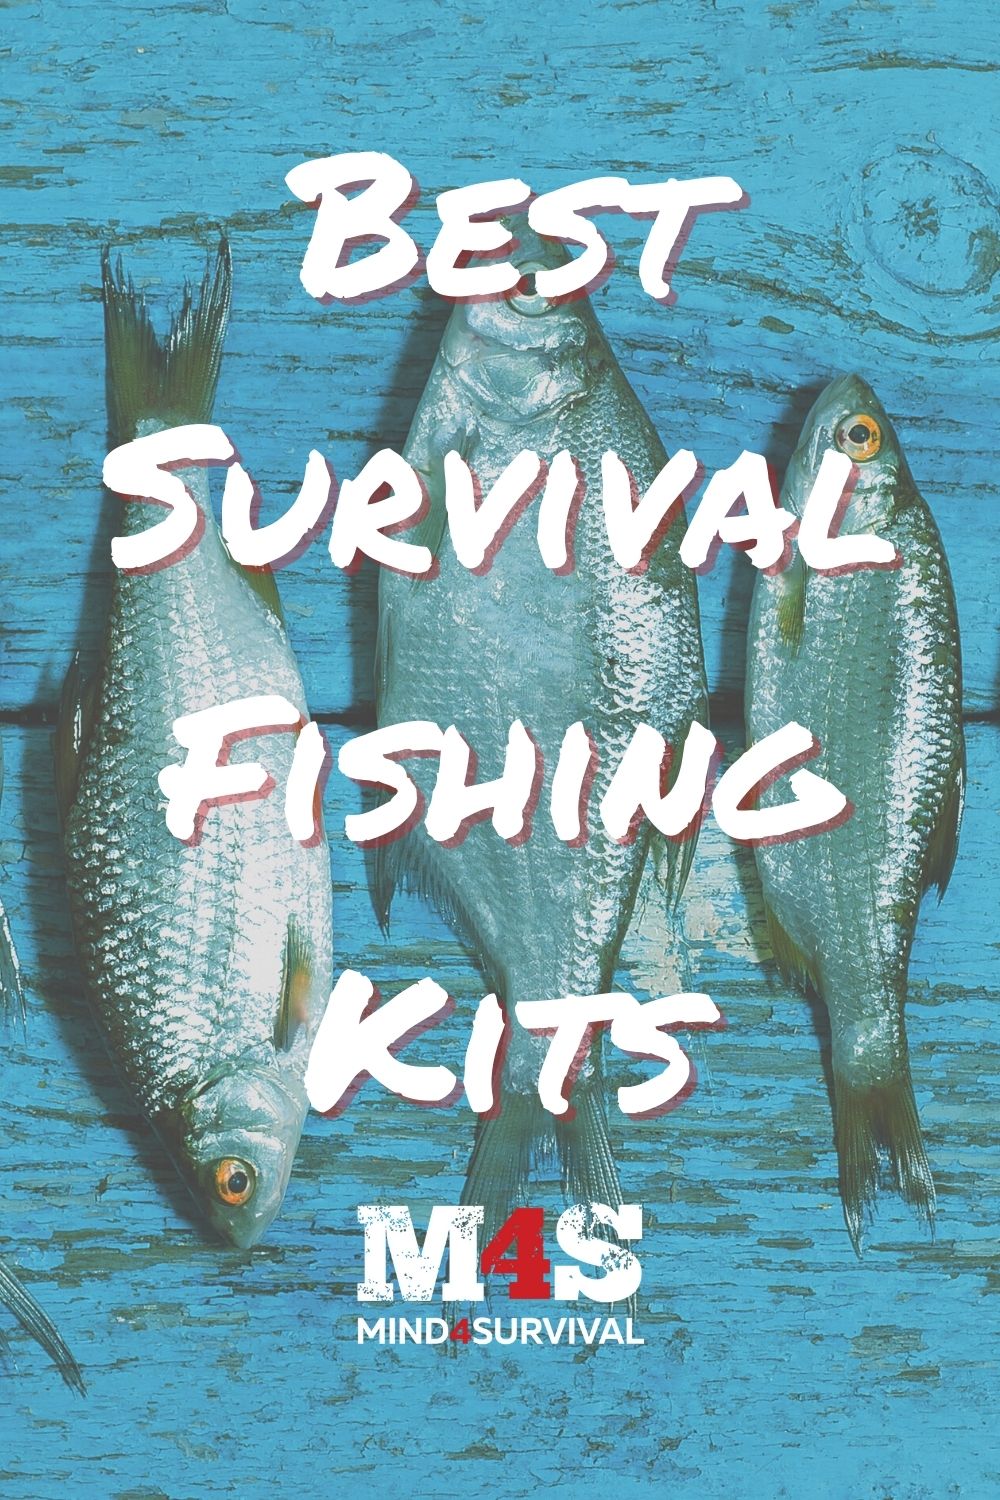 5 Best Survival Fishing Kits for Emergencies and SHTF